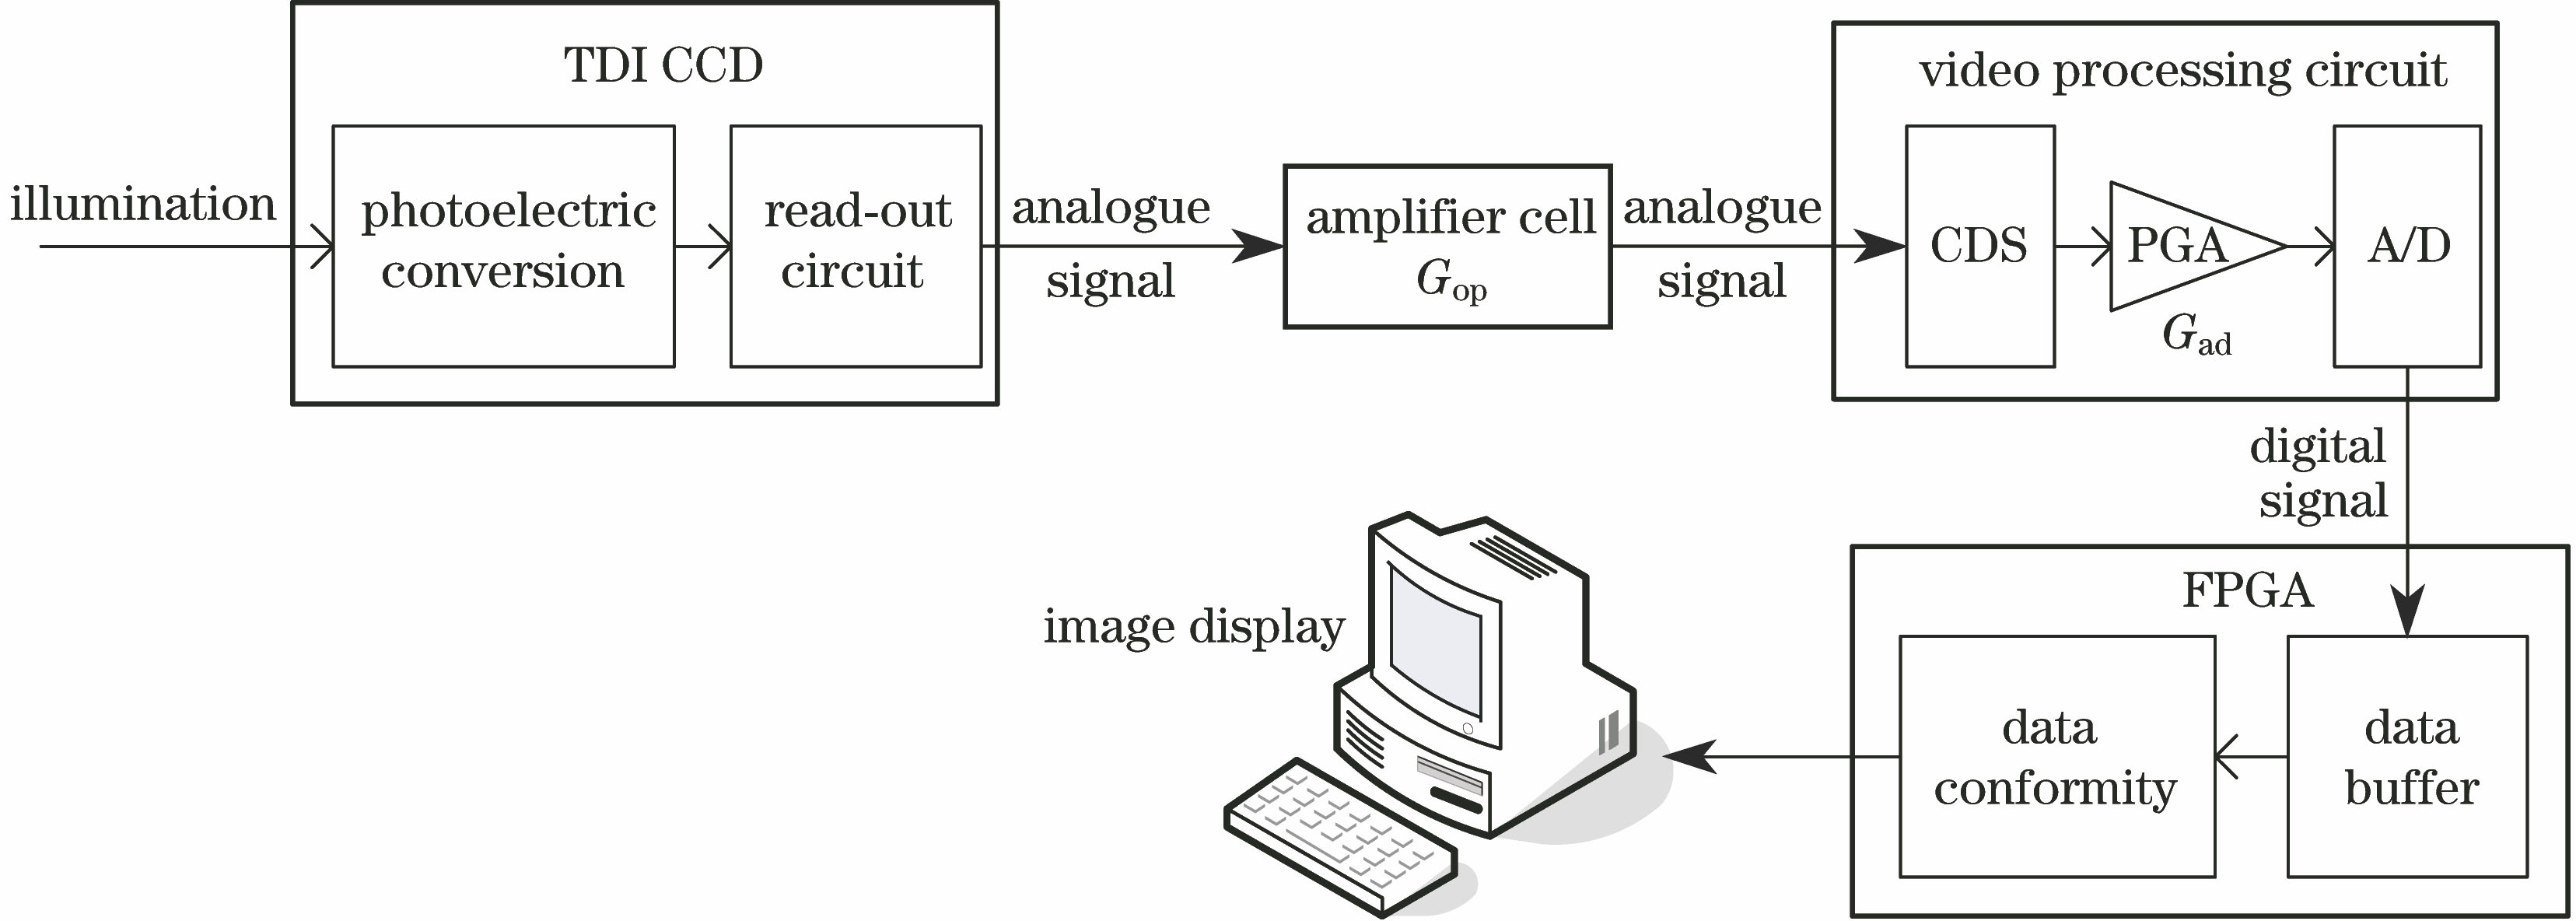 Signal processing flow of TDI CCD imaging system